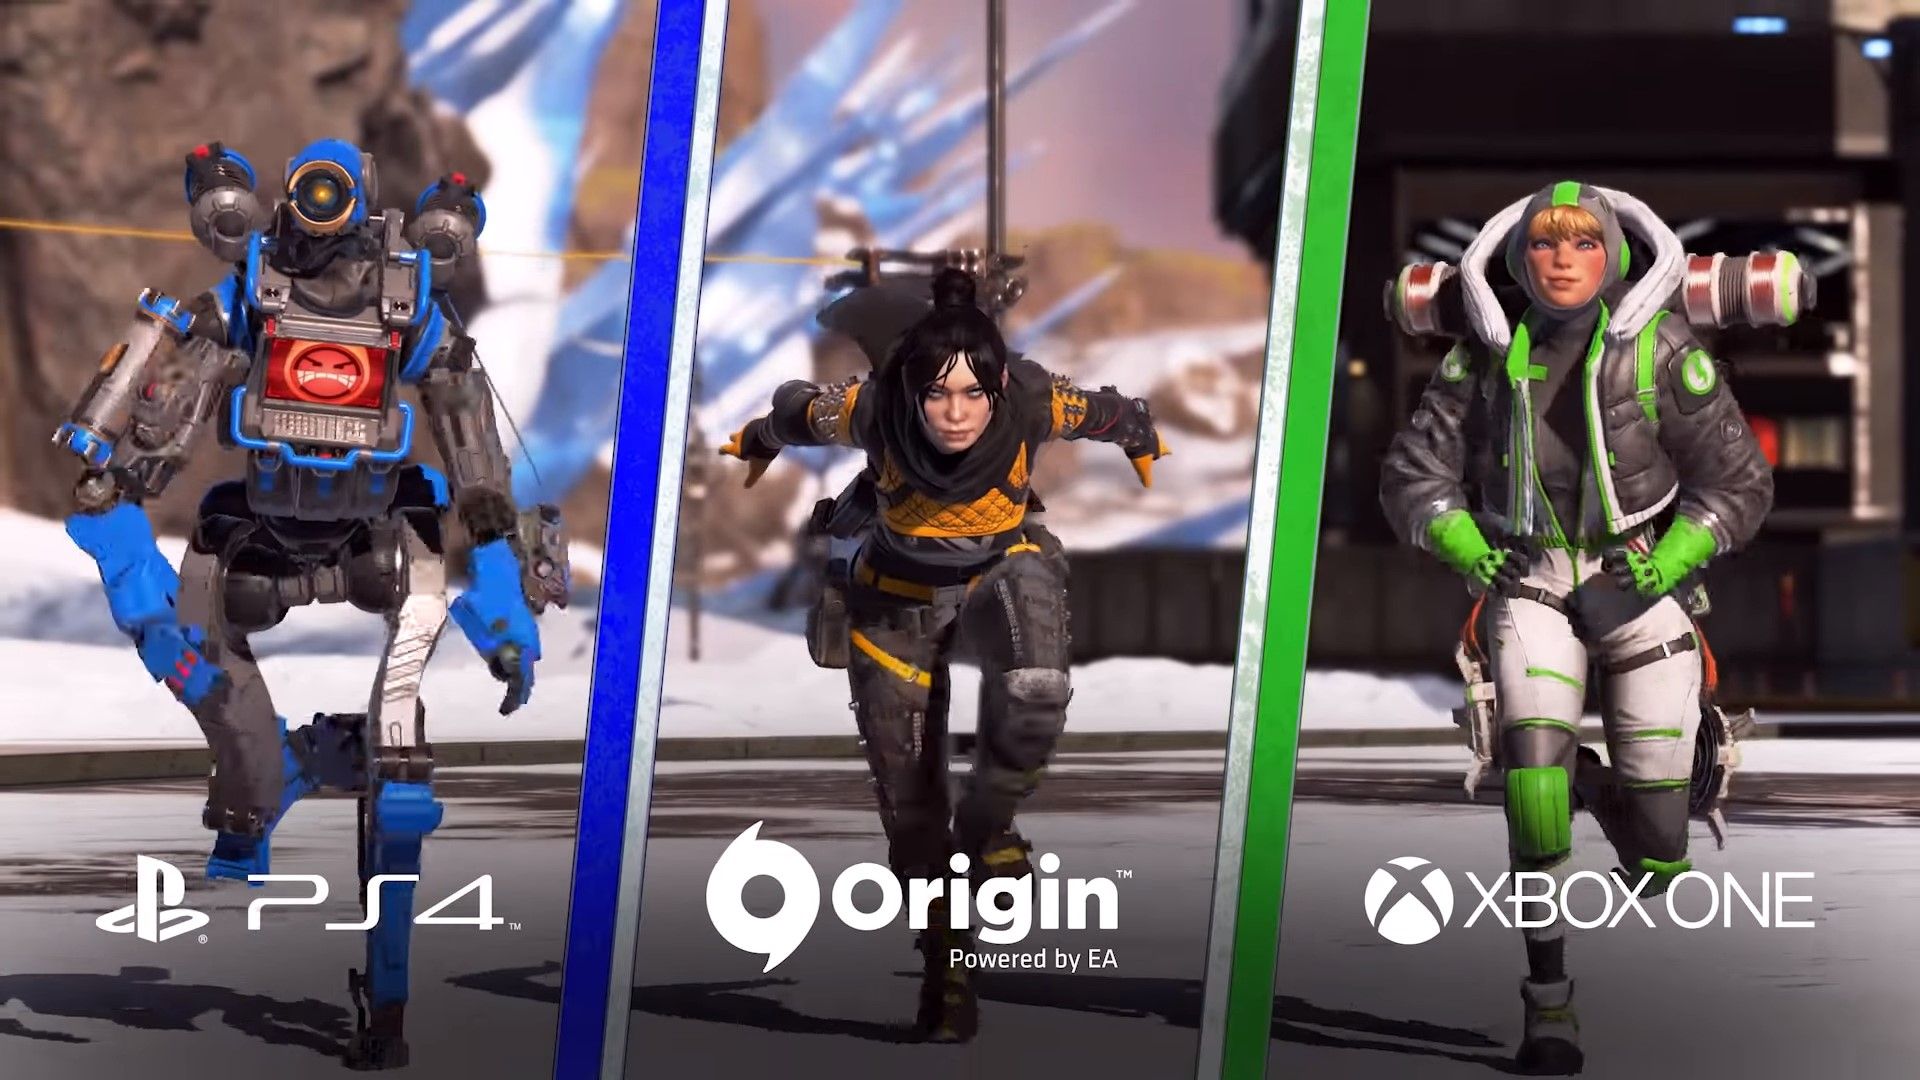 Apex Legends Cross-Play Will Only Match To PC If PC Players Are On